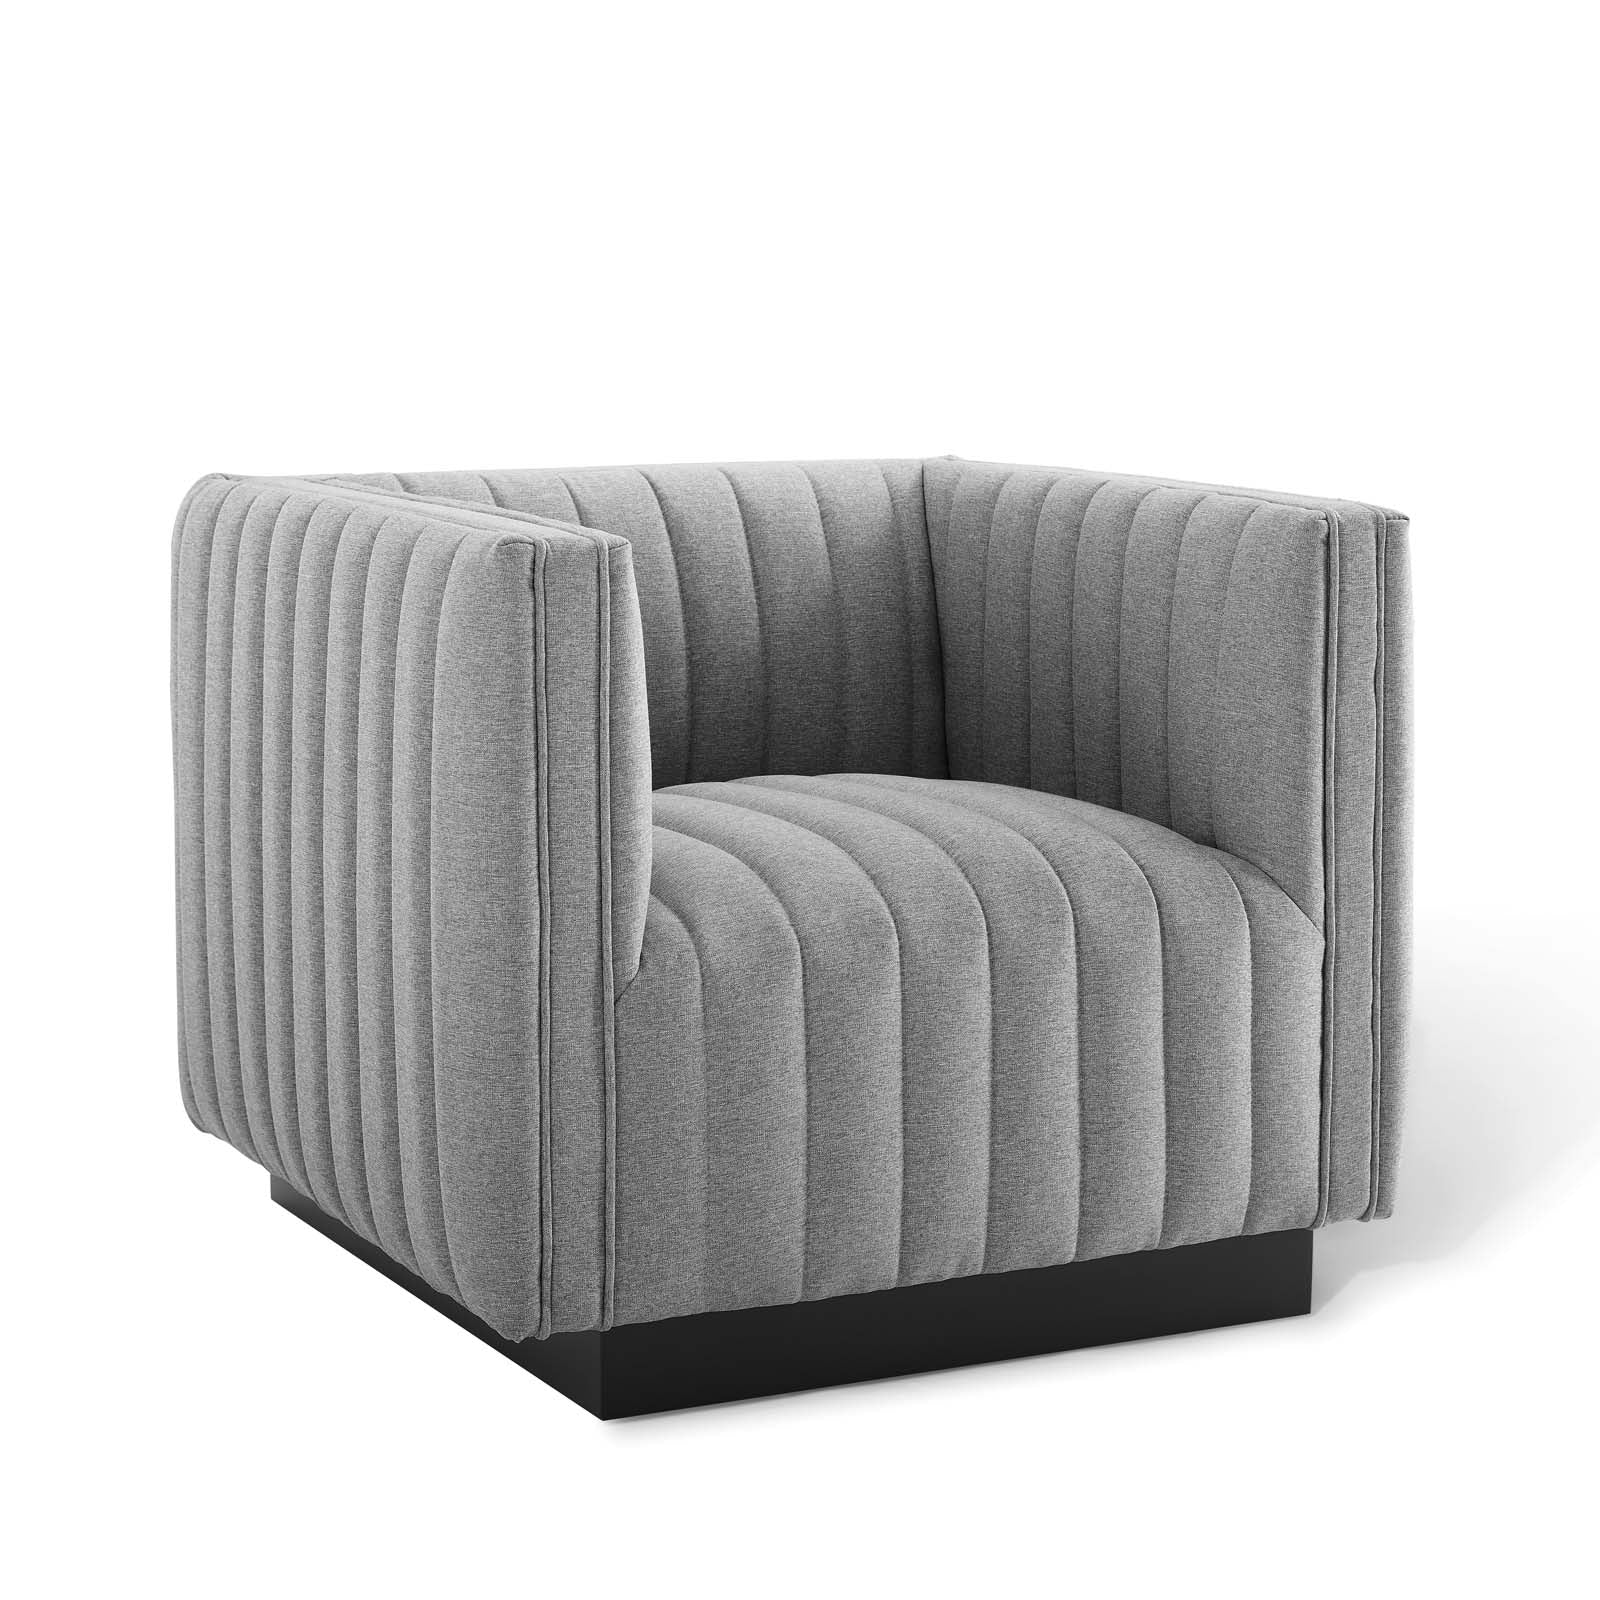 Modway Accent Chairs - Conjure Tufted Upholstered Fabric Armchair Light Gray